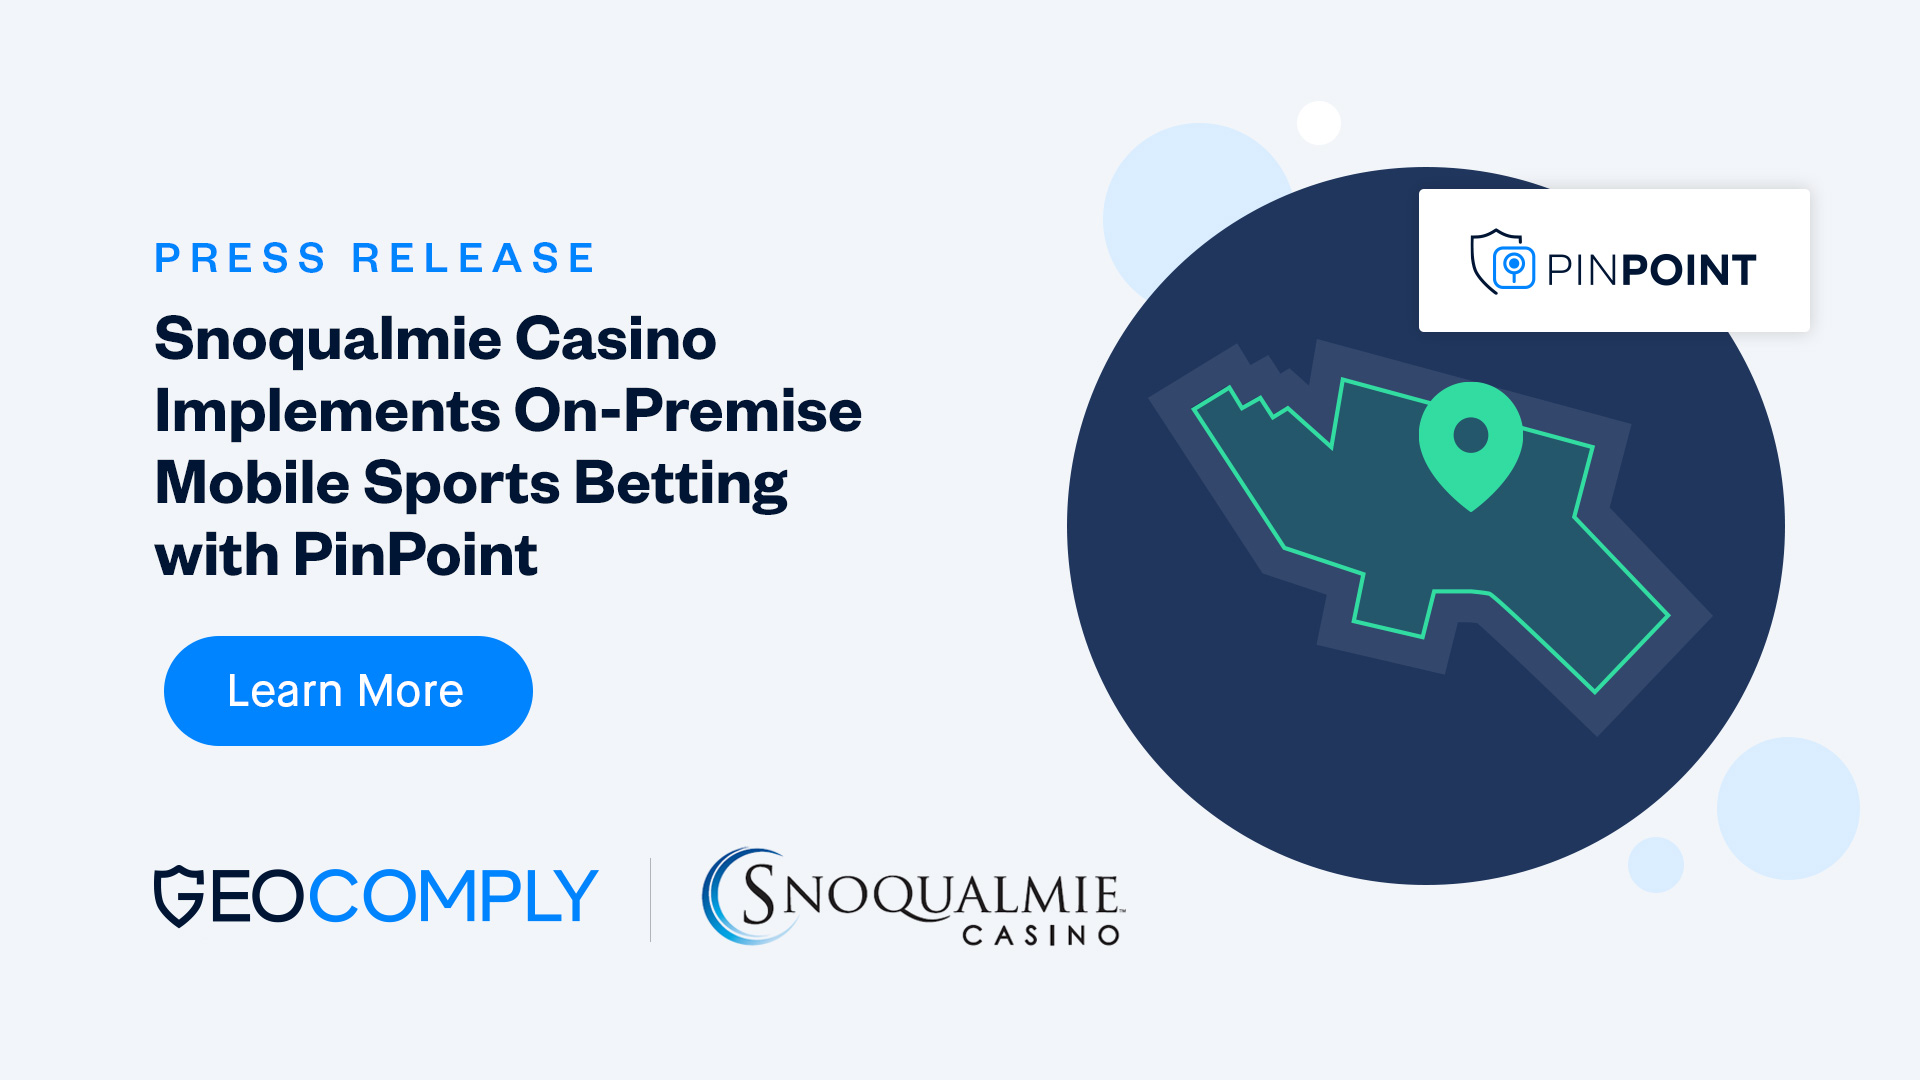 Press-Release_geocomply_pinpoint_snoqualimie_casino